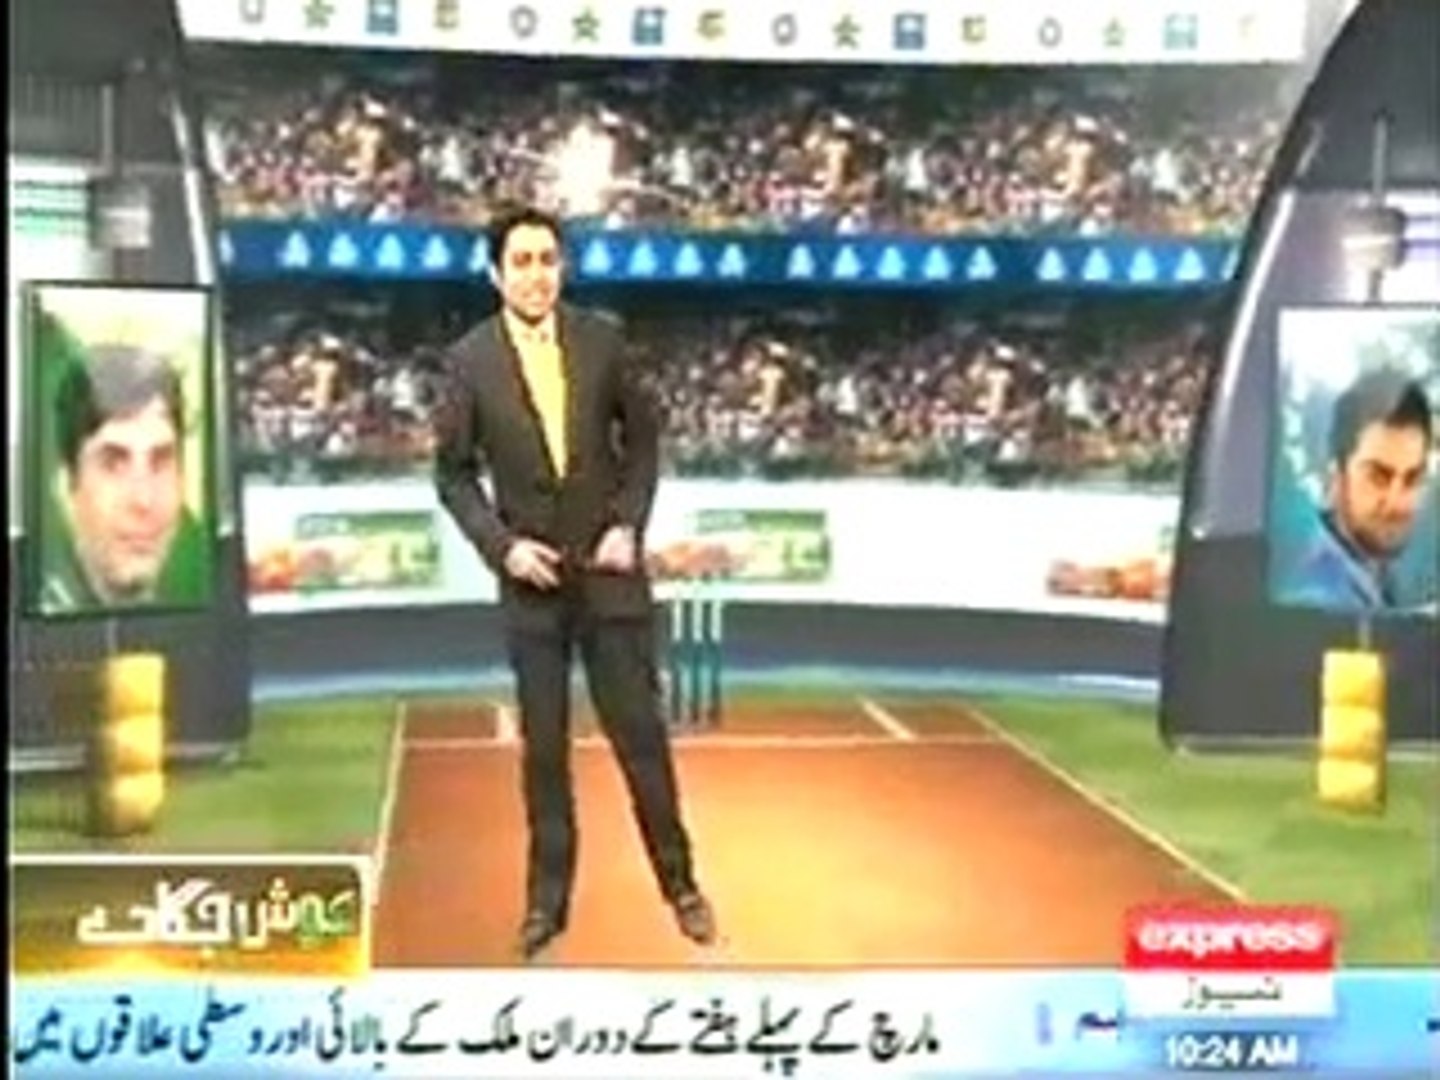 Asia Cup 2014 - PAK Vs India Today - Express News Today